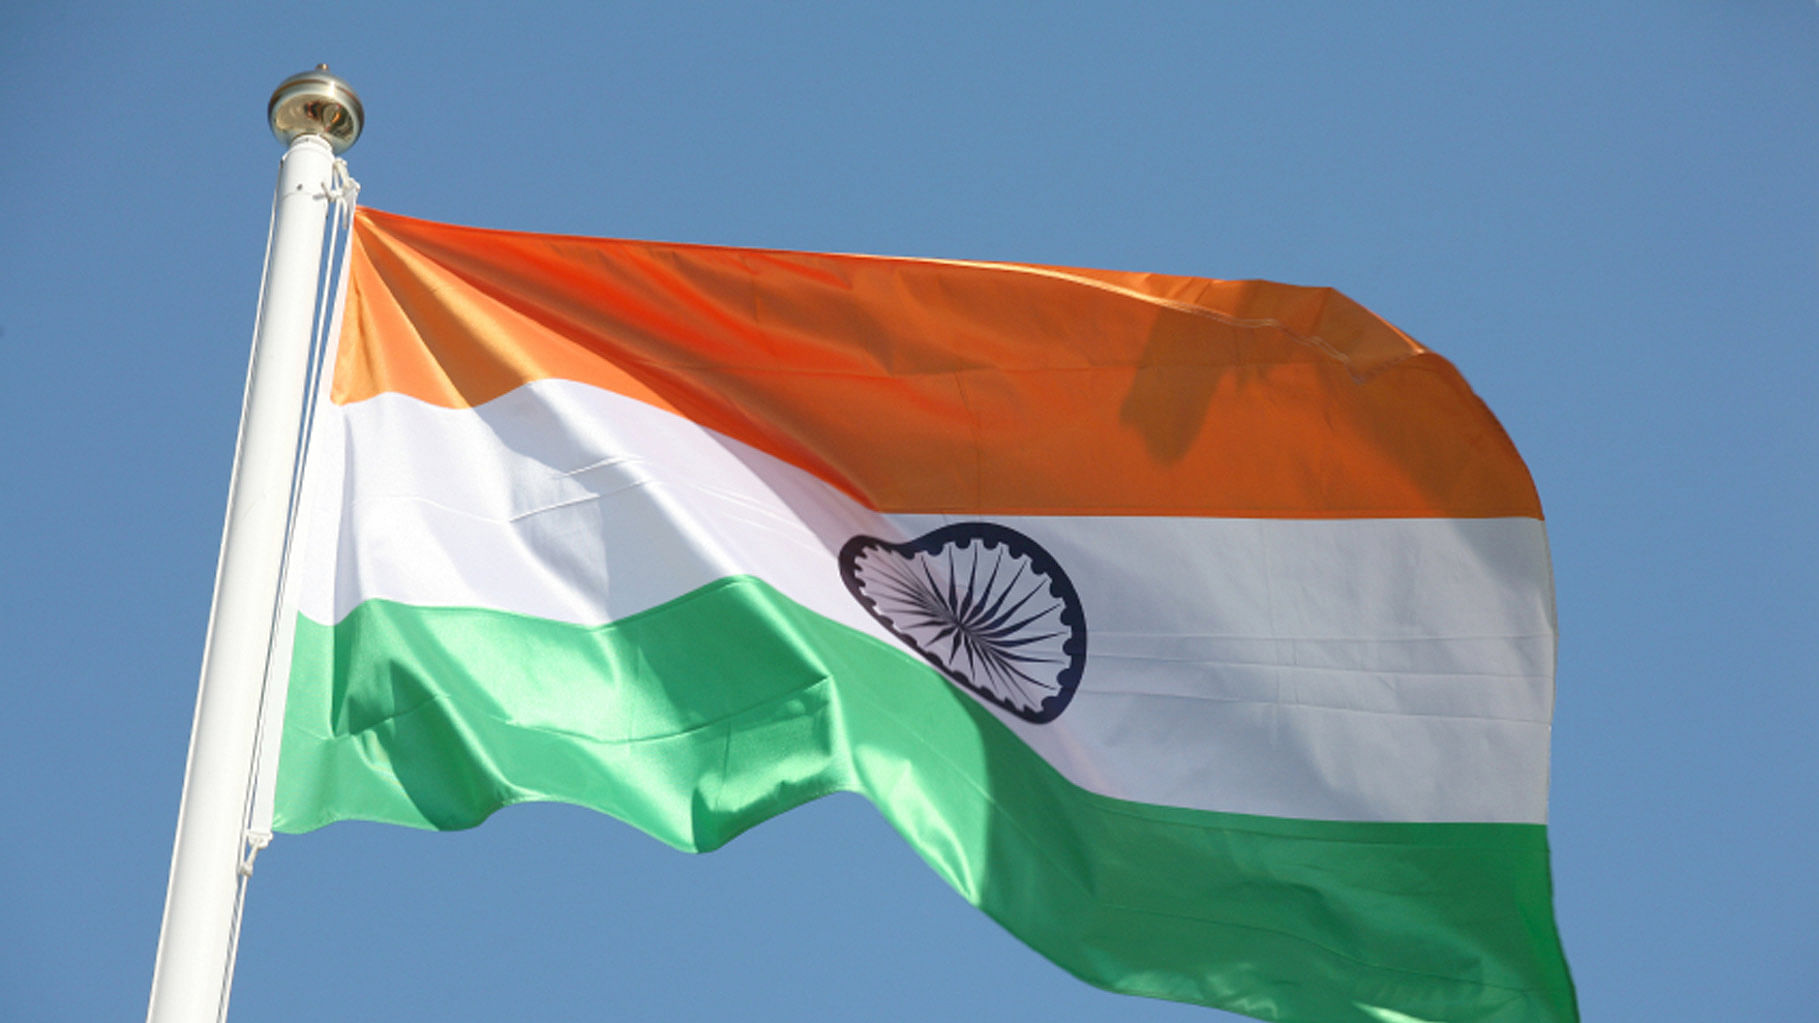 The Indian flag. (Photo: iStock)